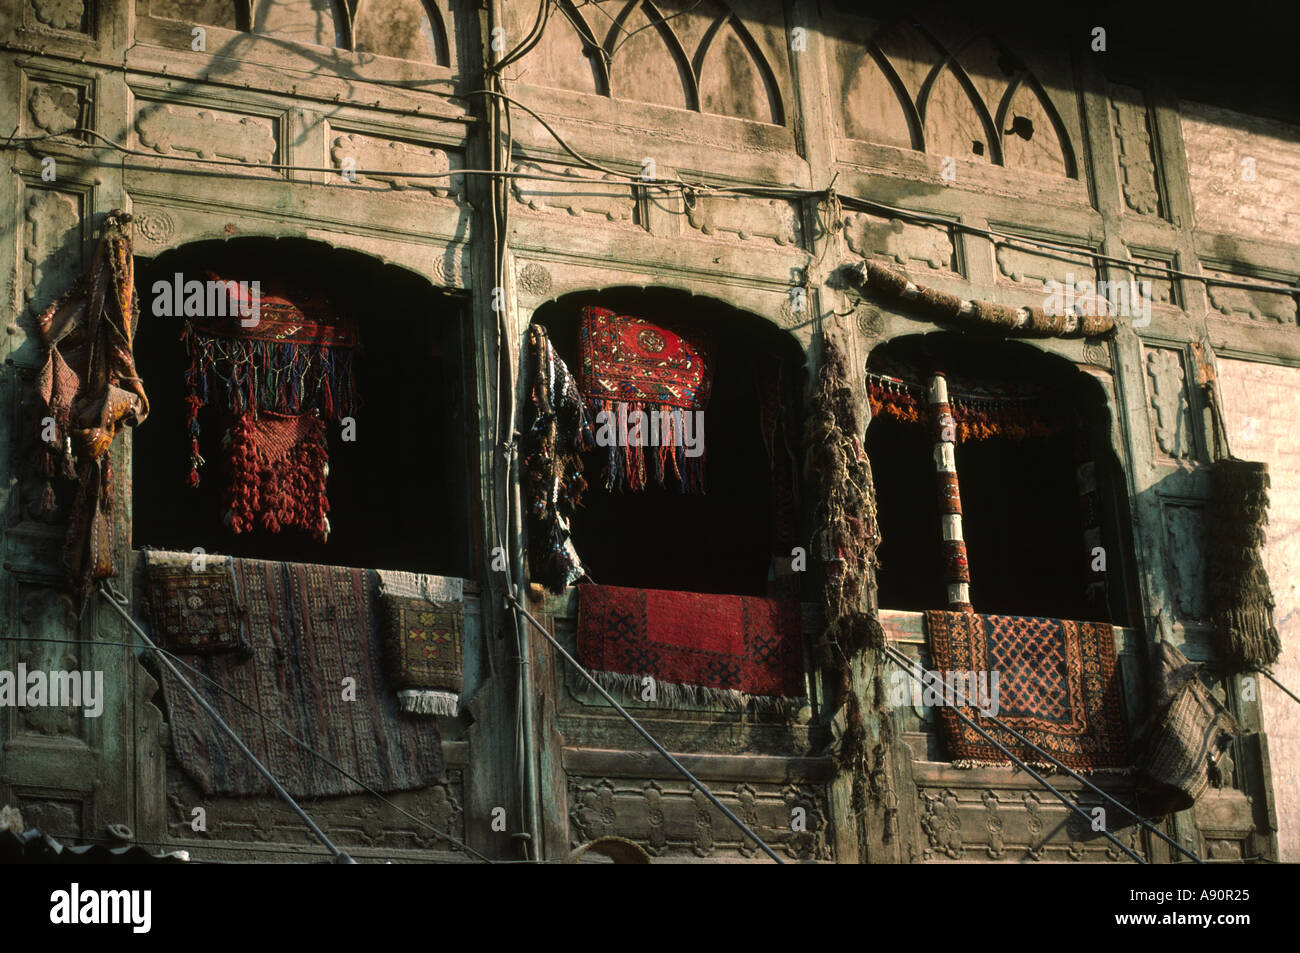 Pakistan NWFP Peshawar Old carpets and hangings outside shop Stock Photo